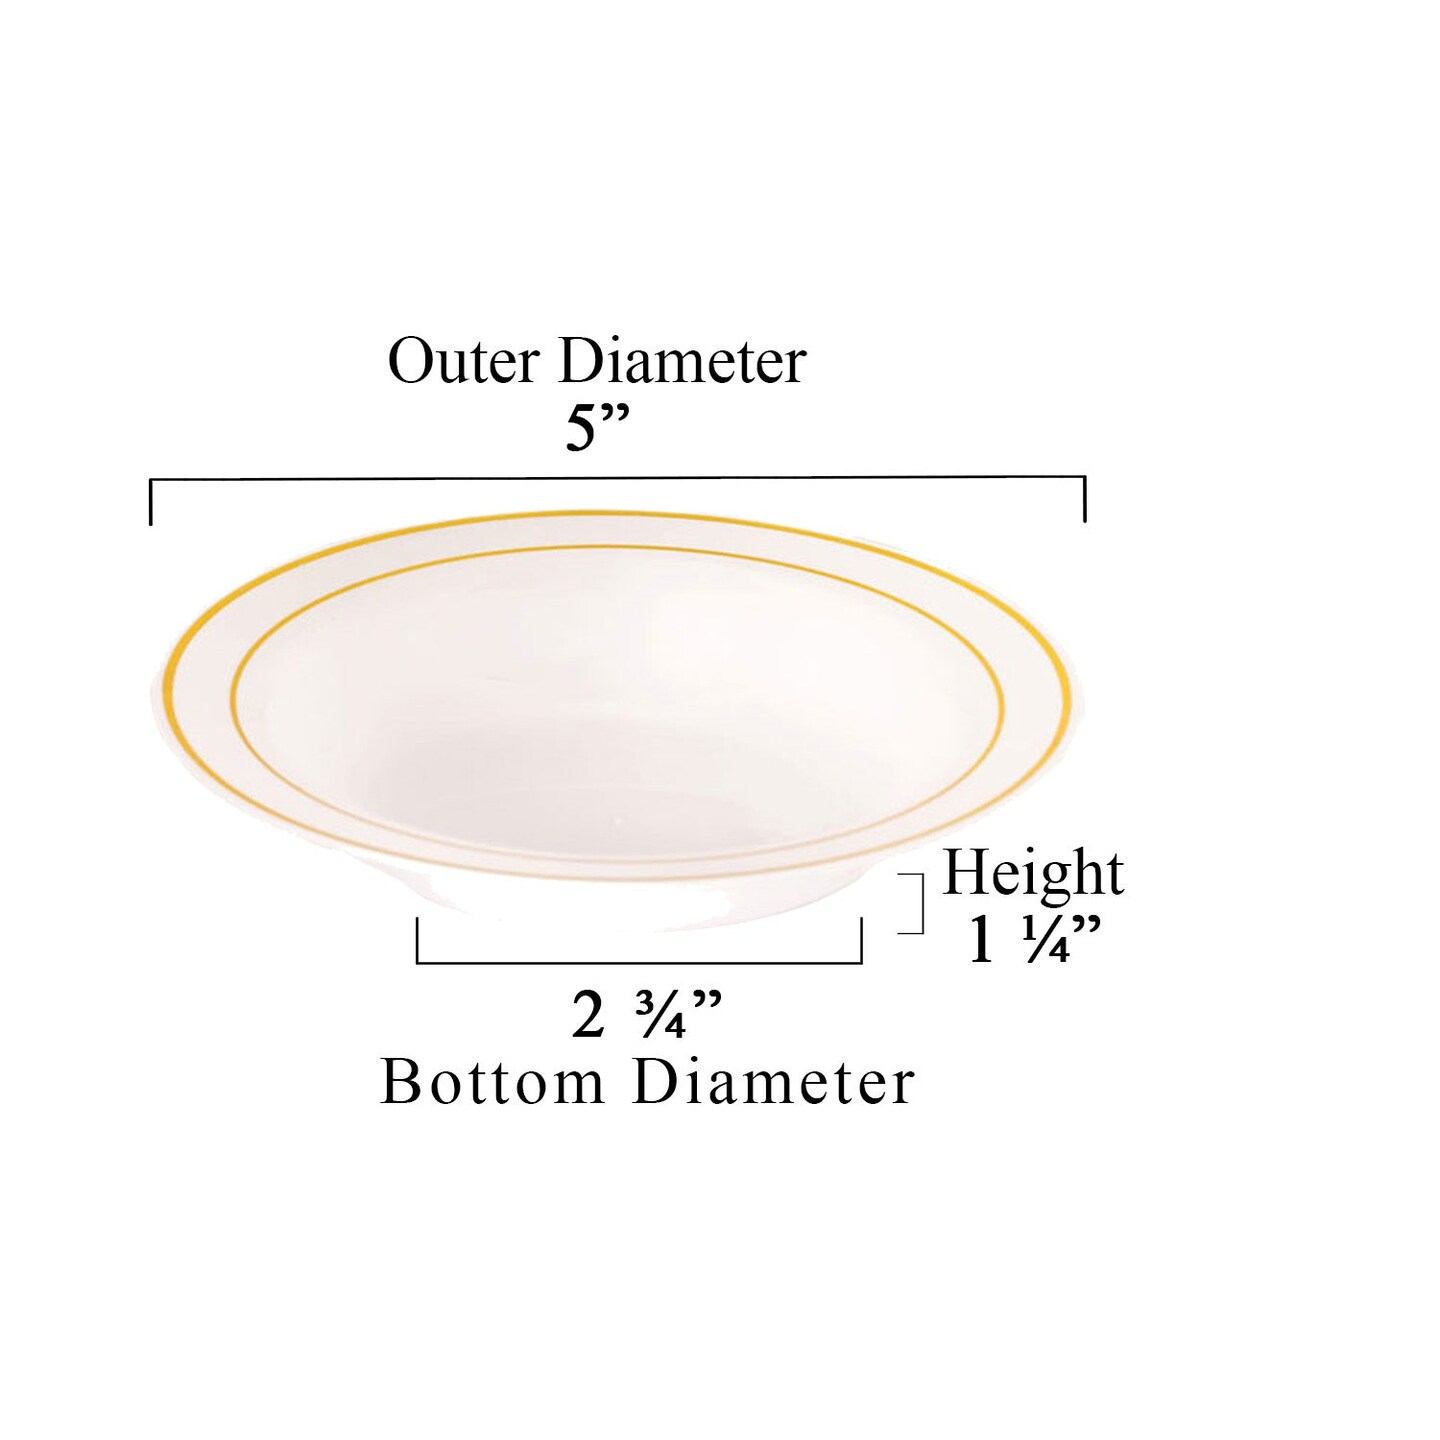 White with Gold Edge Rim Round Disposable Plastic Dessert Bowls -5 Ounce (120 Bowls)